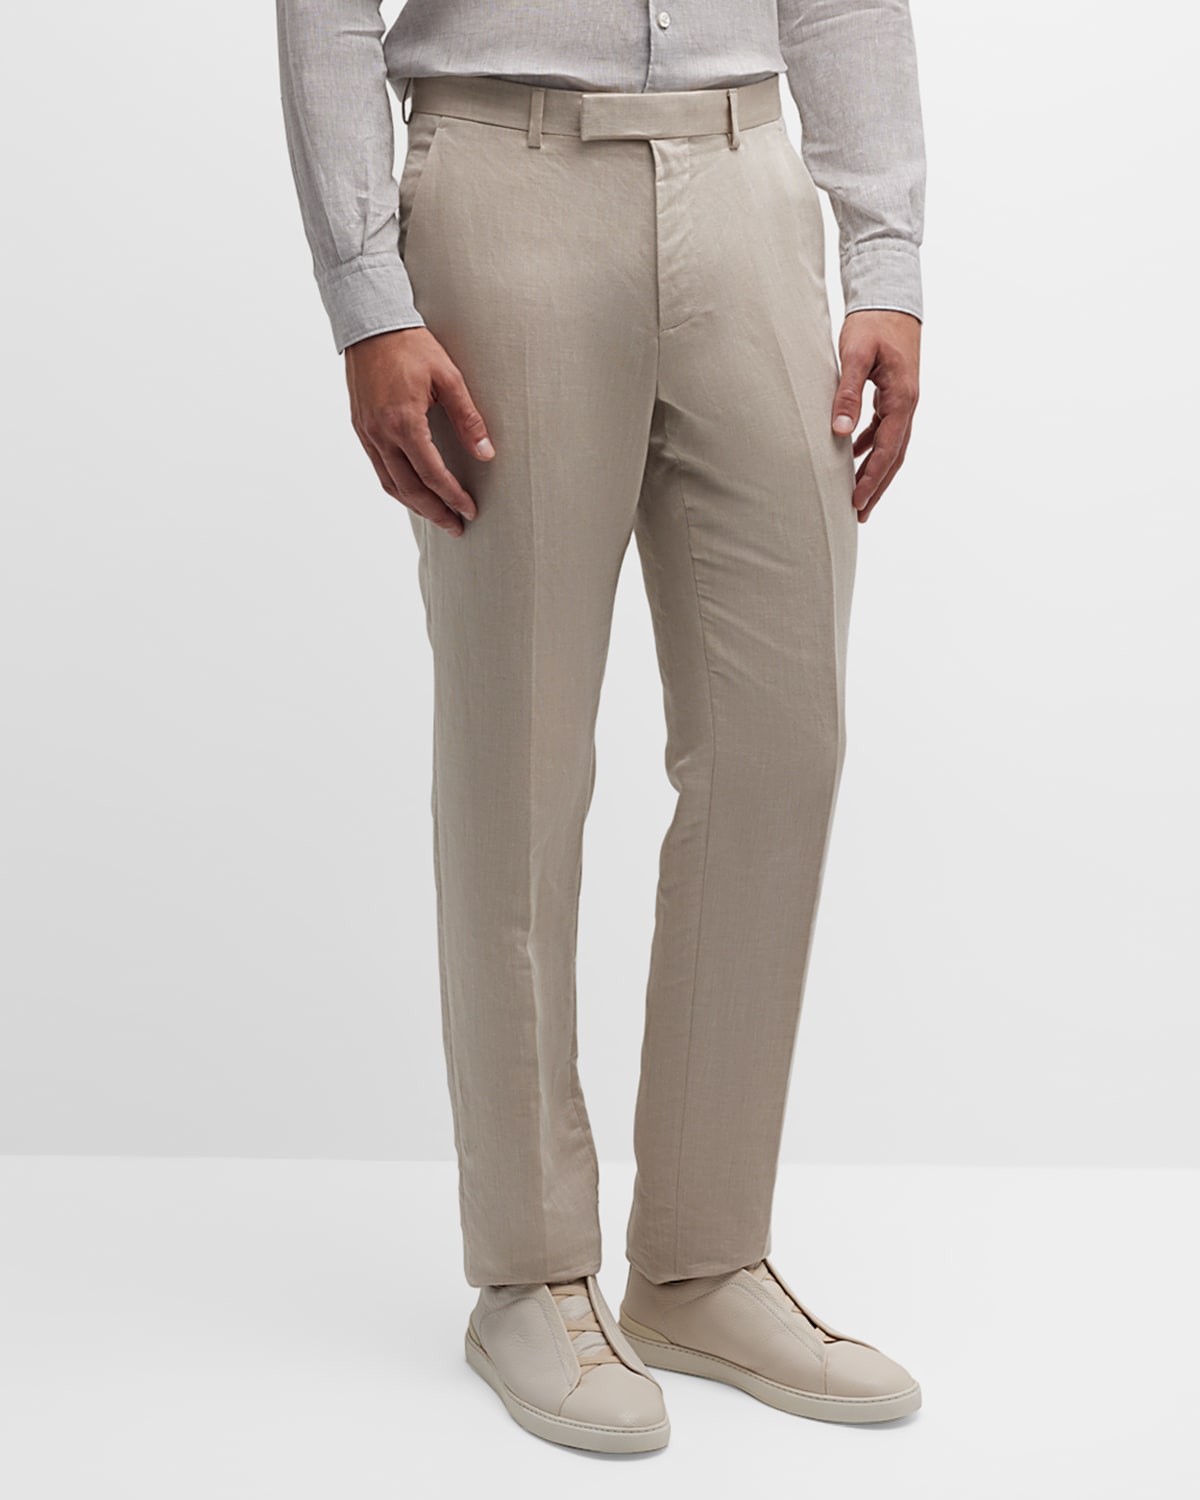 Zegna Men's Linen Stretch Pants In Silver Solid